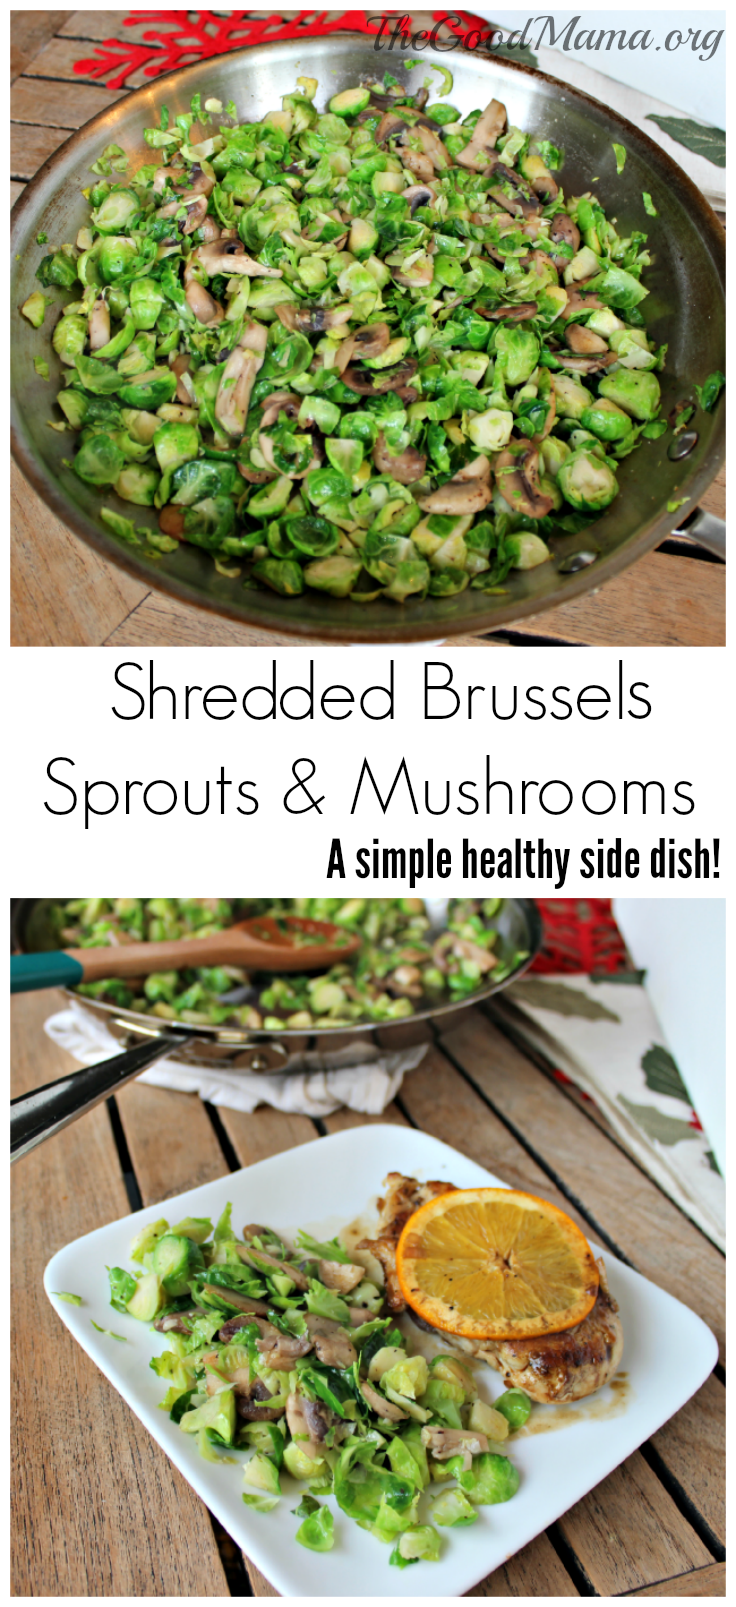 Shredded Brussels Sprouts and Mushrooms Recipe- A simple, healthy side dish! 